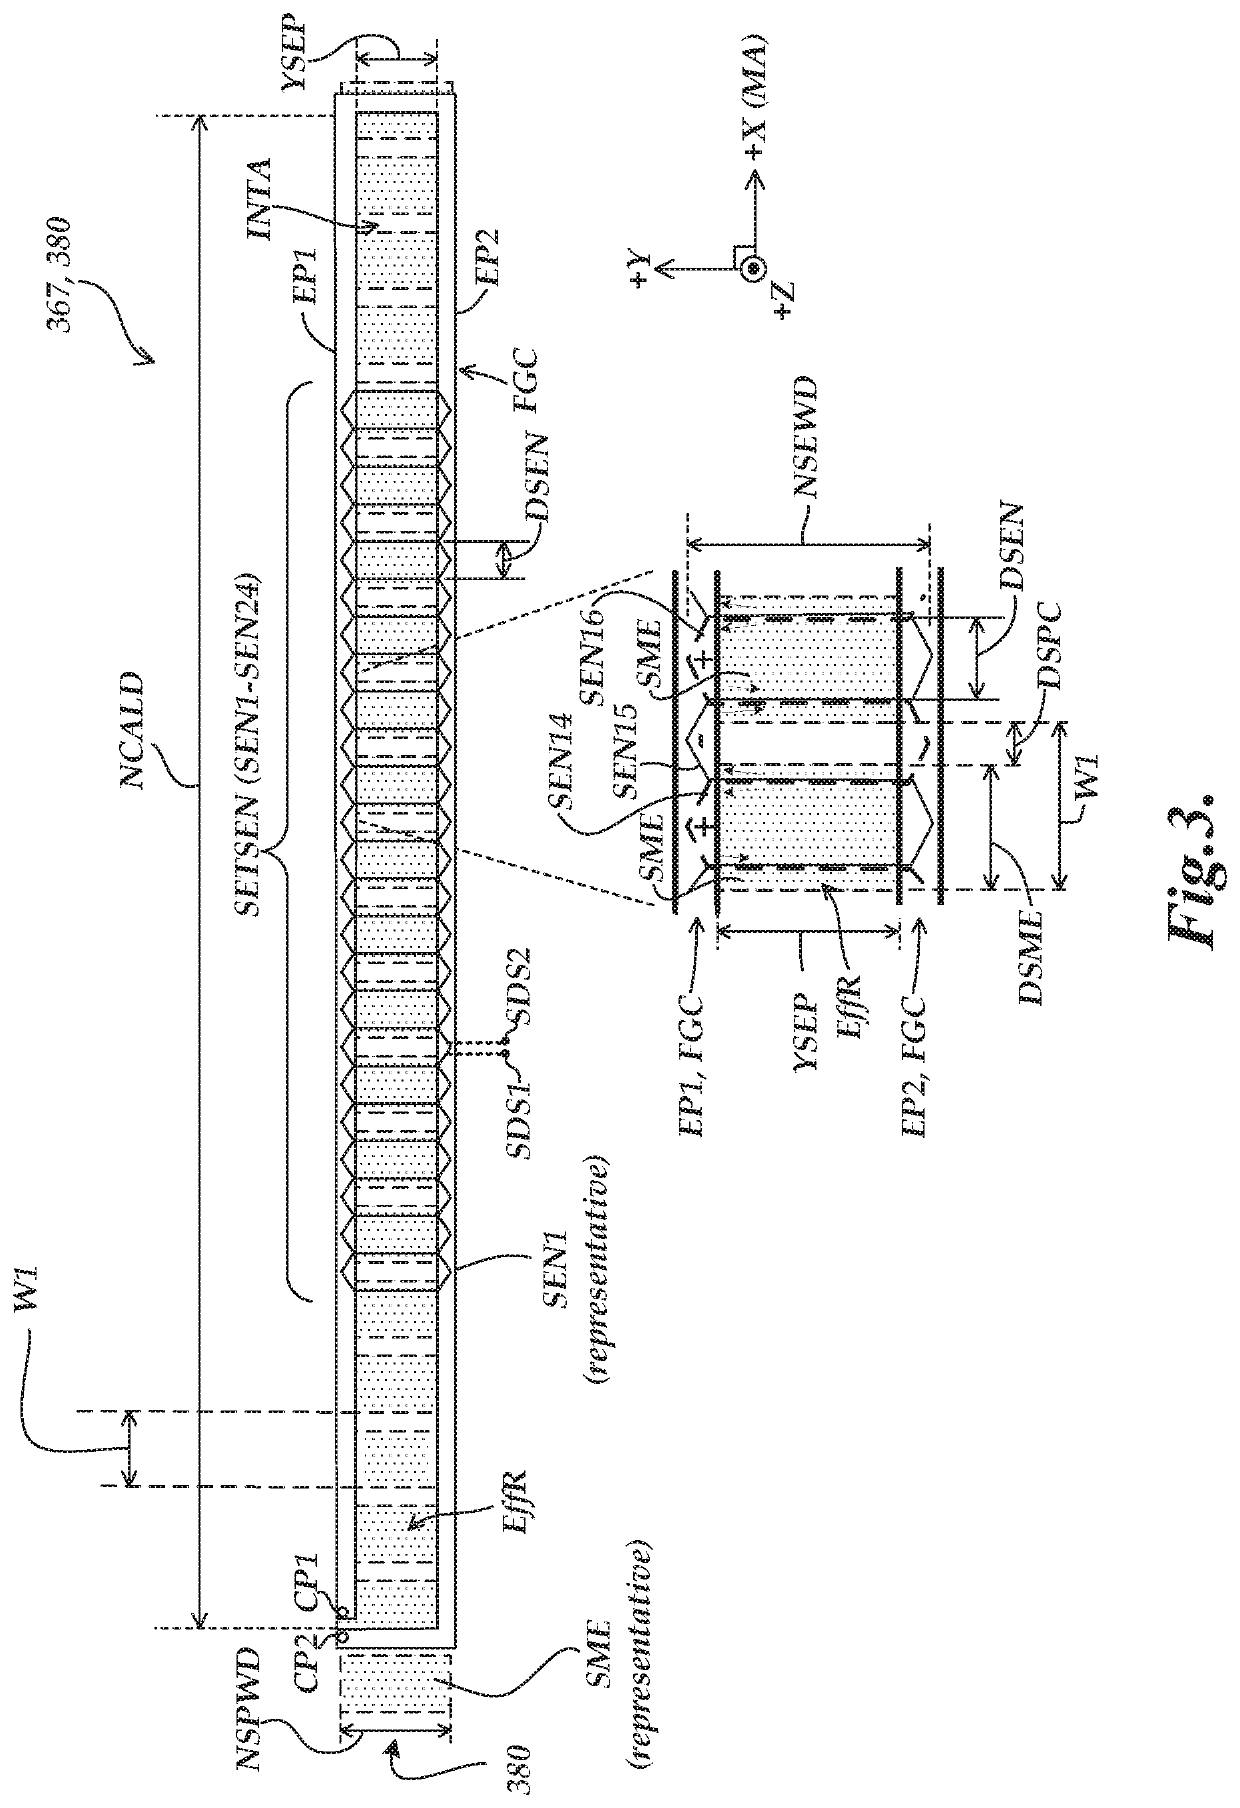 Scale configuration for inductive position encoder